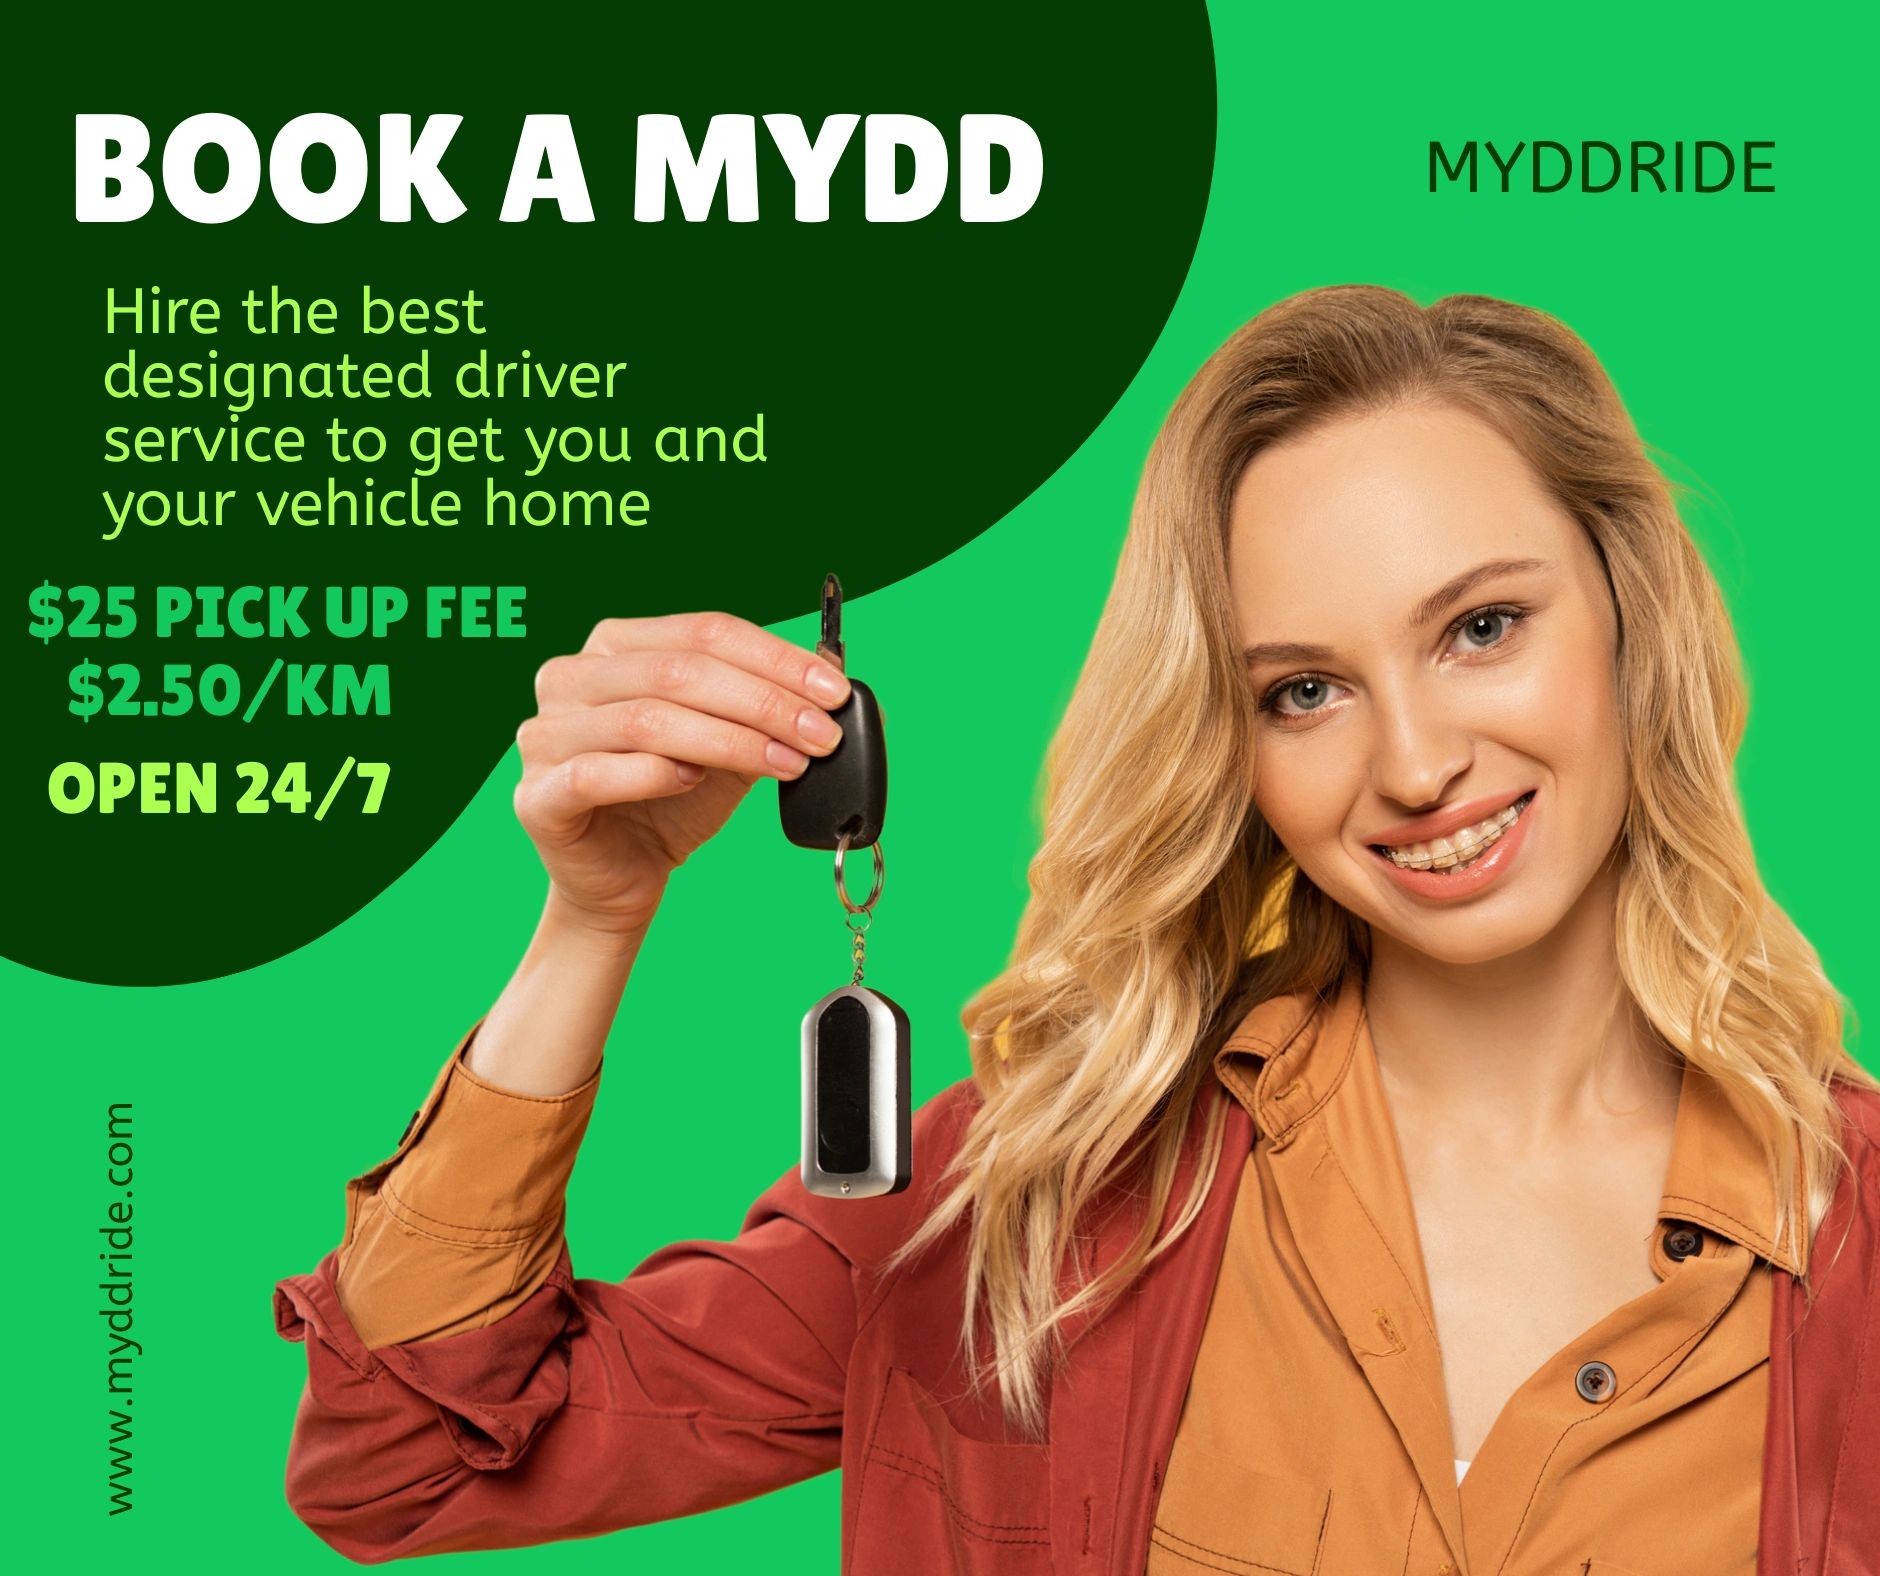 Who will drive my car home? We will! Anytime. Book a MyDD. We save lives. Don't drink and drive